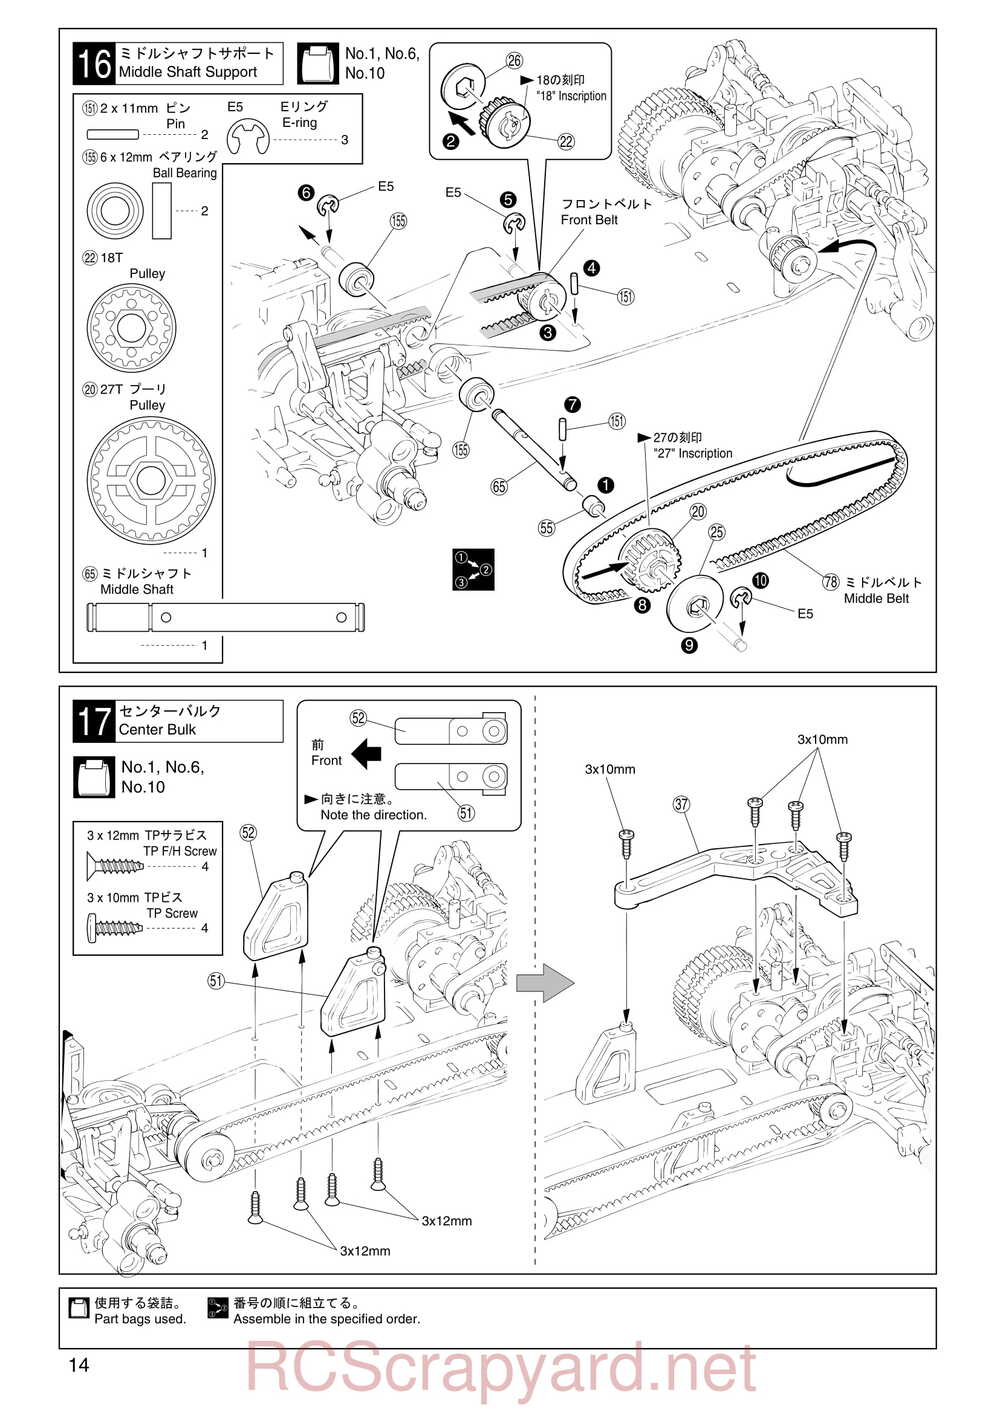 Kyosho - 31011 - V-One R - Manual - Page 14